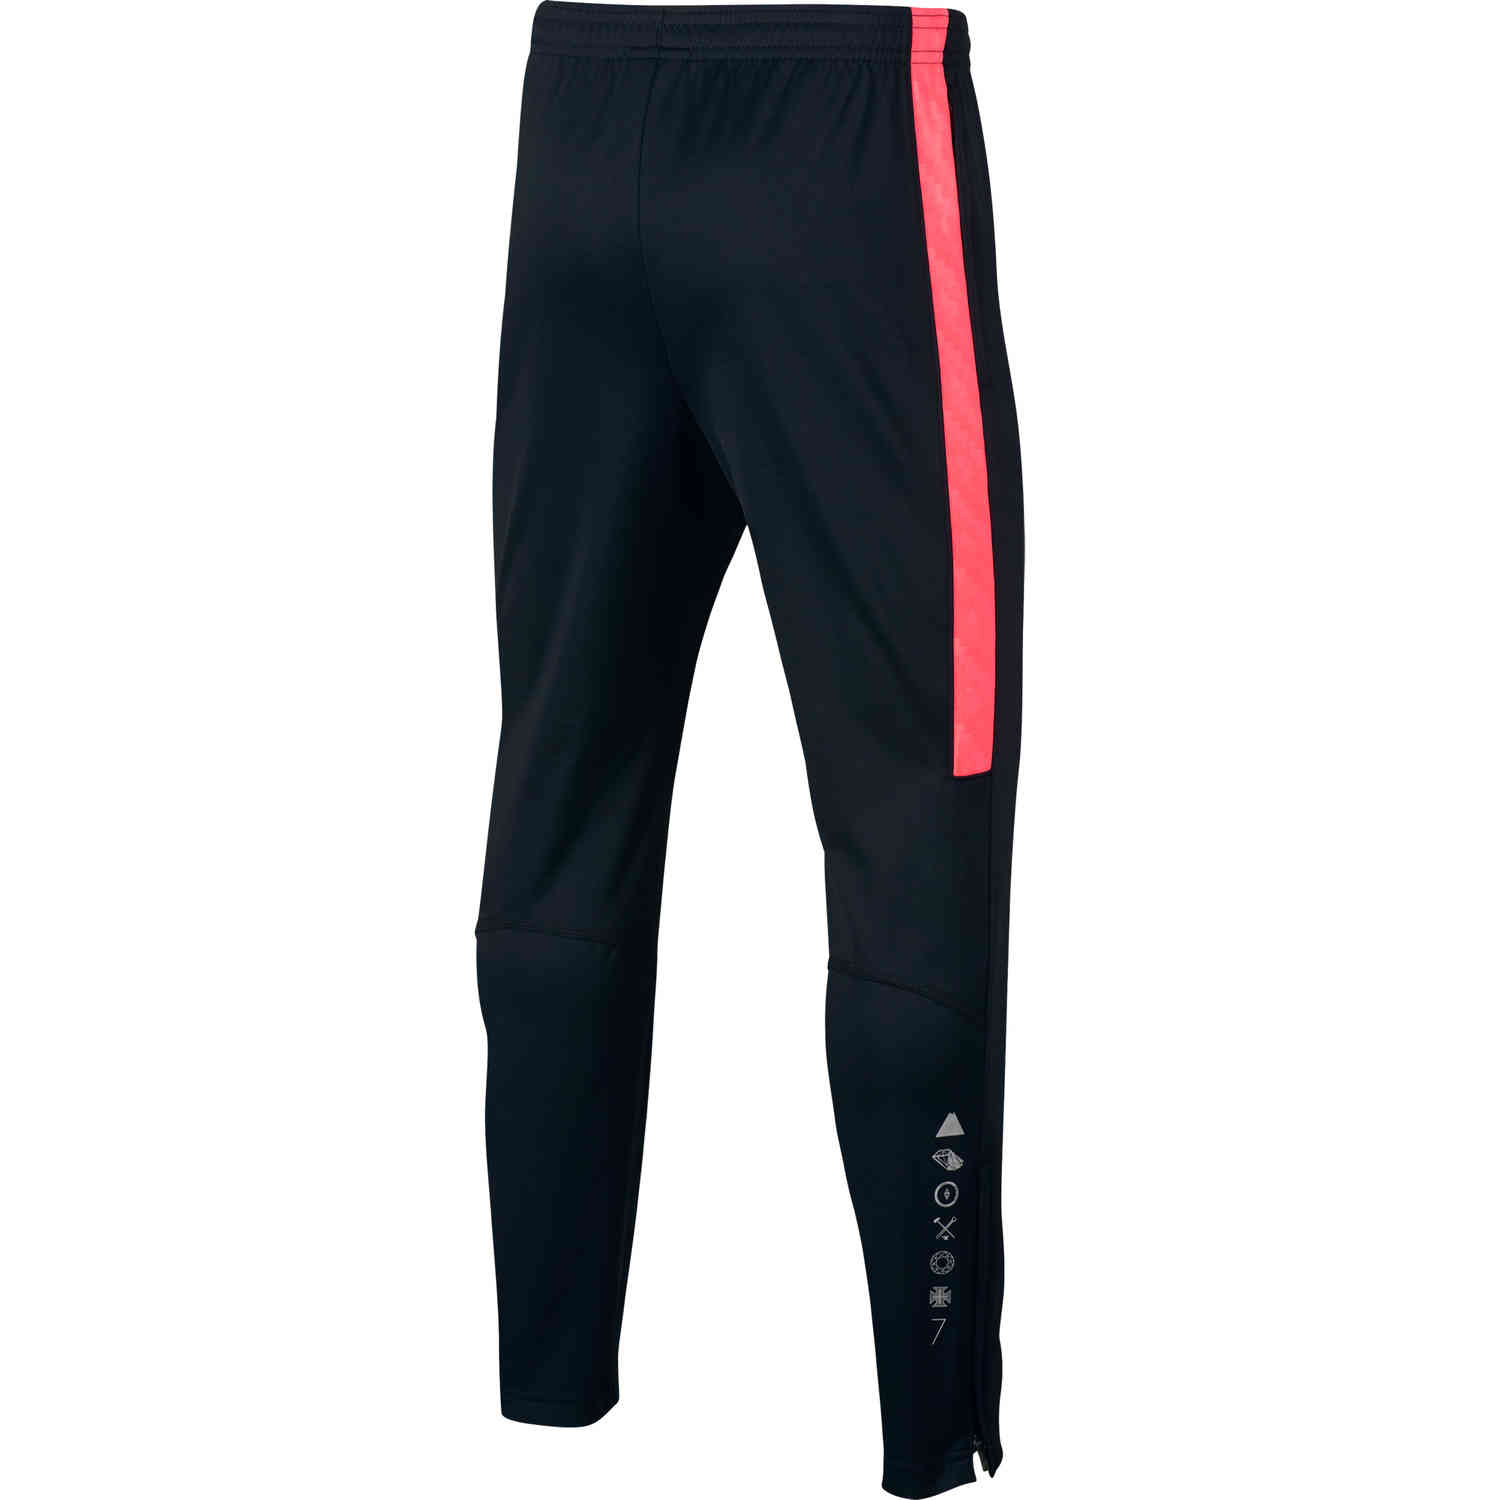 Whitney Siege Whirlpool Nike CR7 Dry Pant - Youth - Black/Hot Punch - SoccerPro